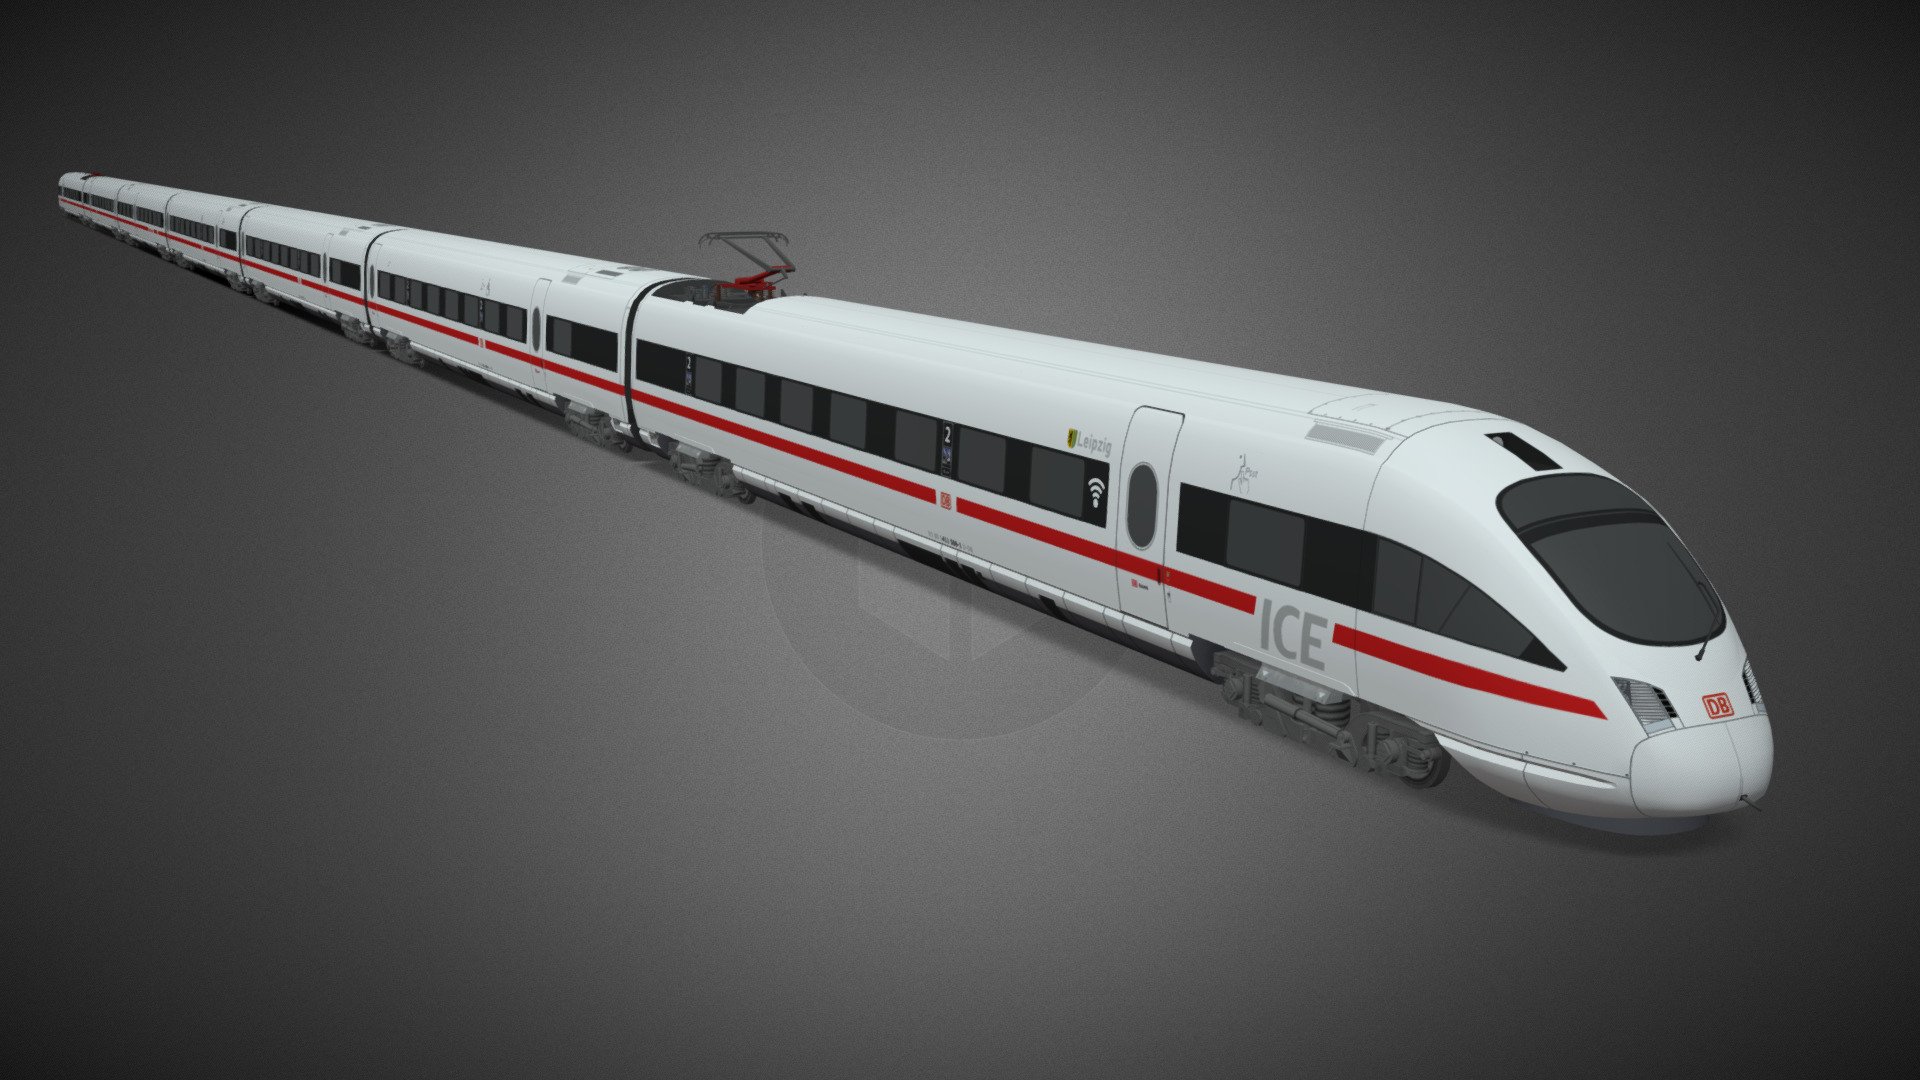 Deutsche Bahn ICE T with 7 cars. This model was originally made as an asset for the game Cities: Skylines. There are simplifications to the texture and model to keep it optimised for the game 3d model